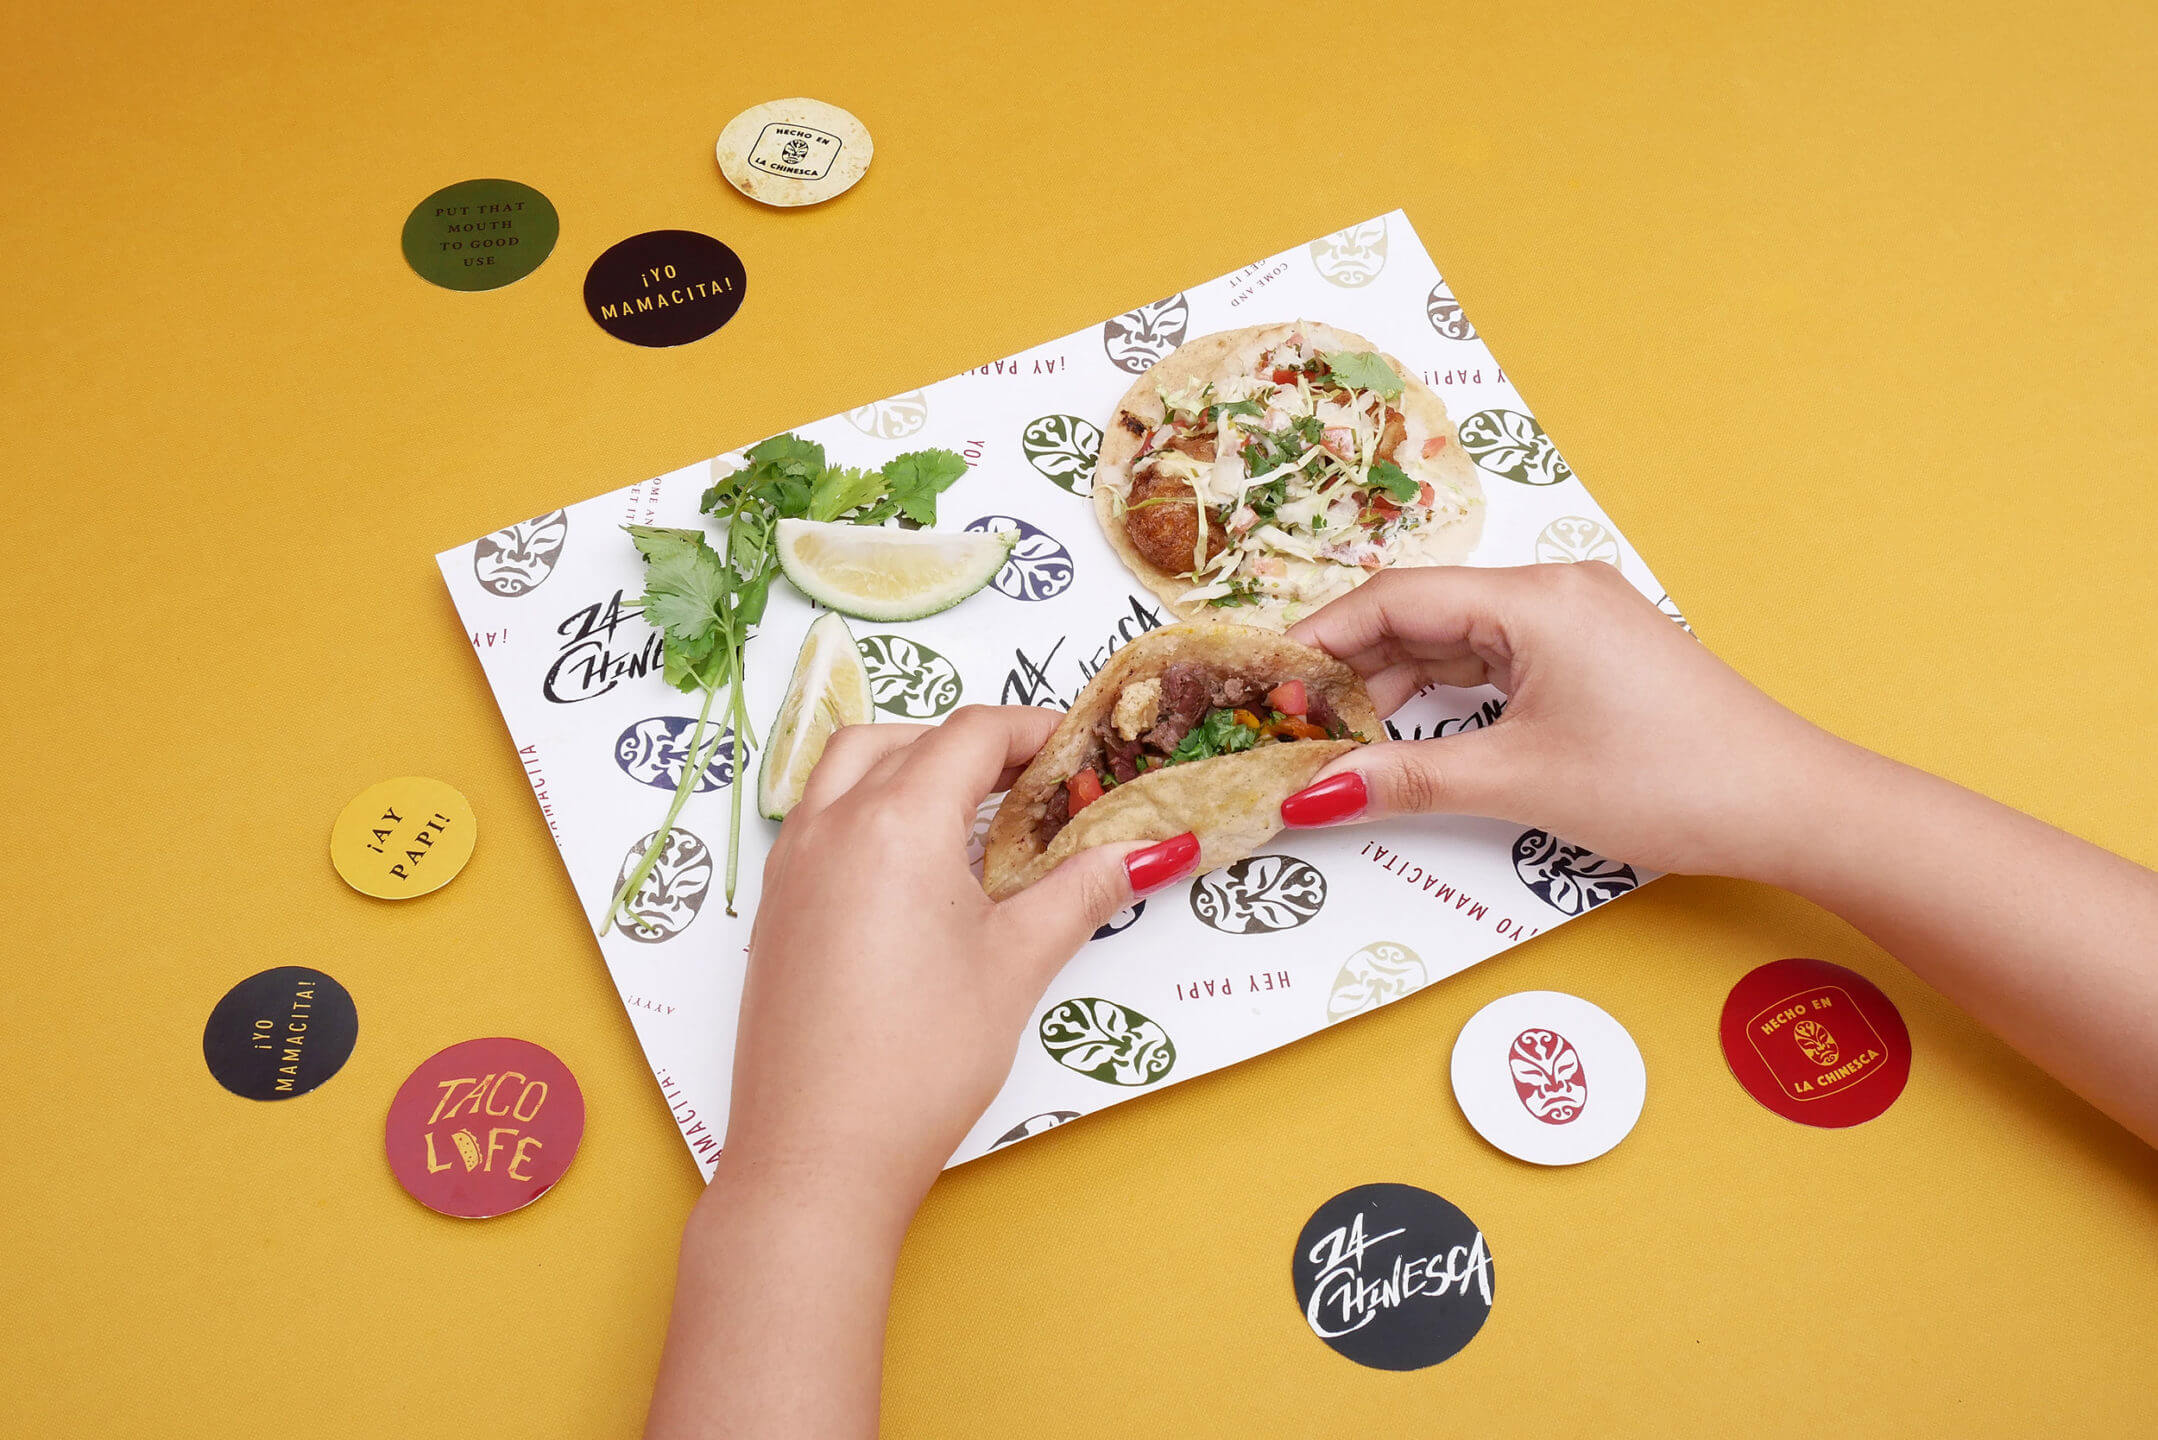 Hands holding a soft shell La Chinesca taco surrounded by branded stickers